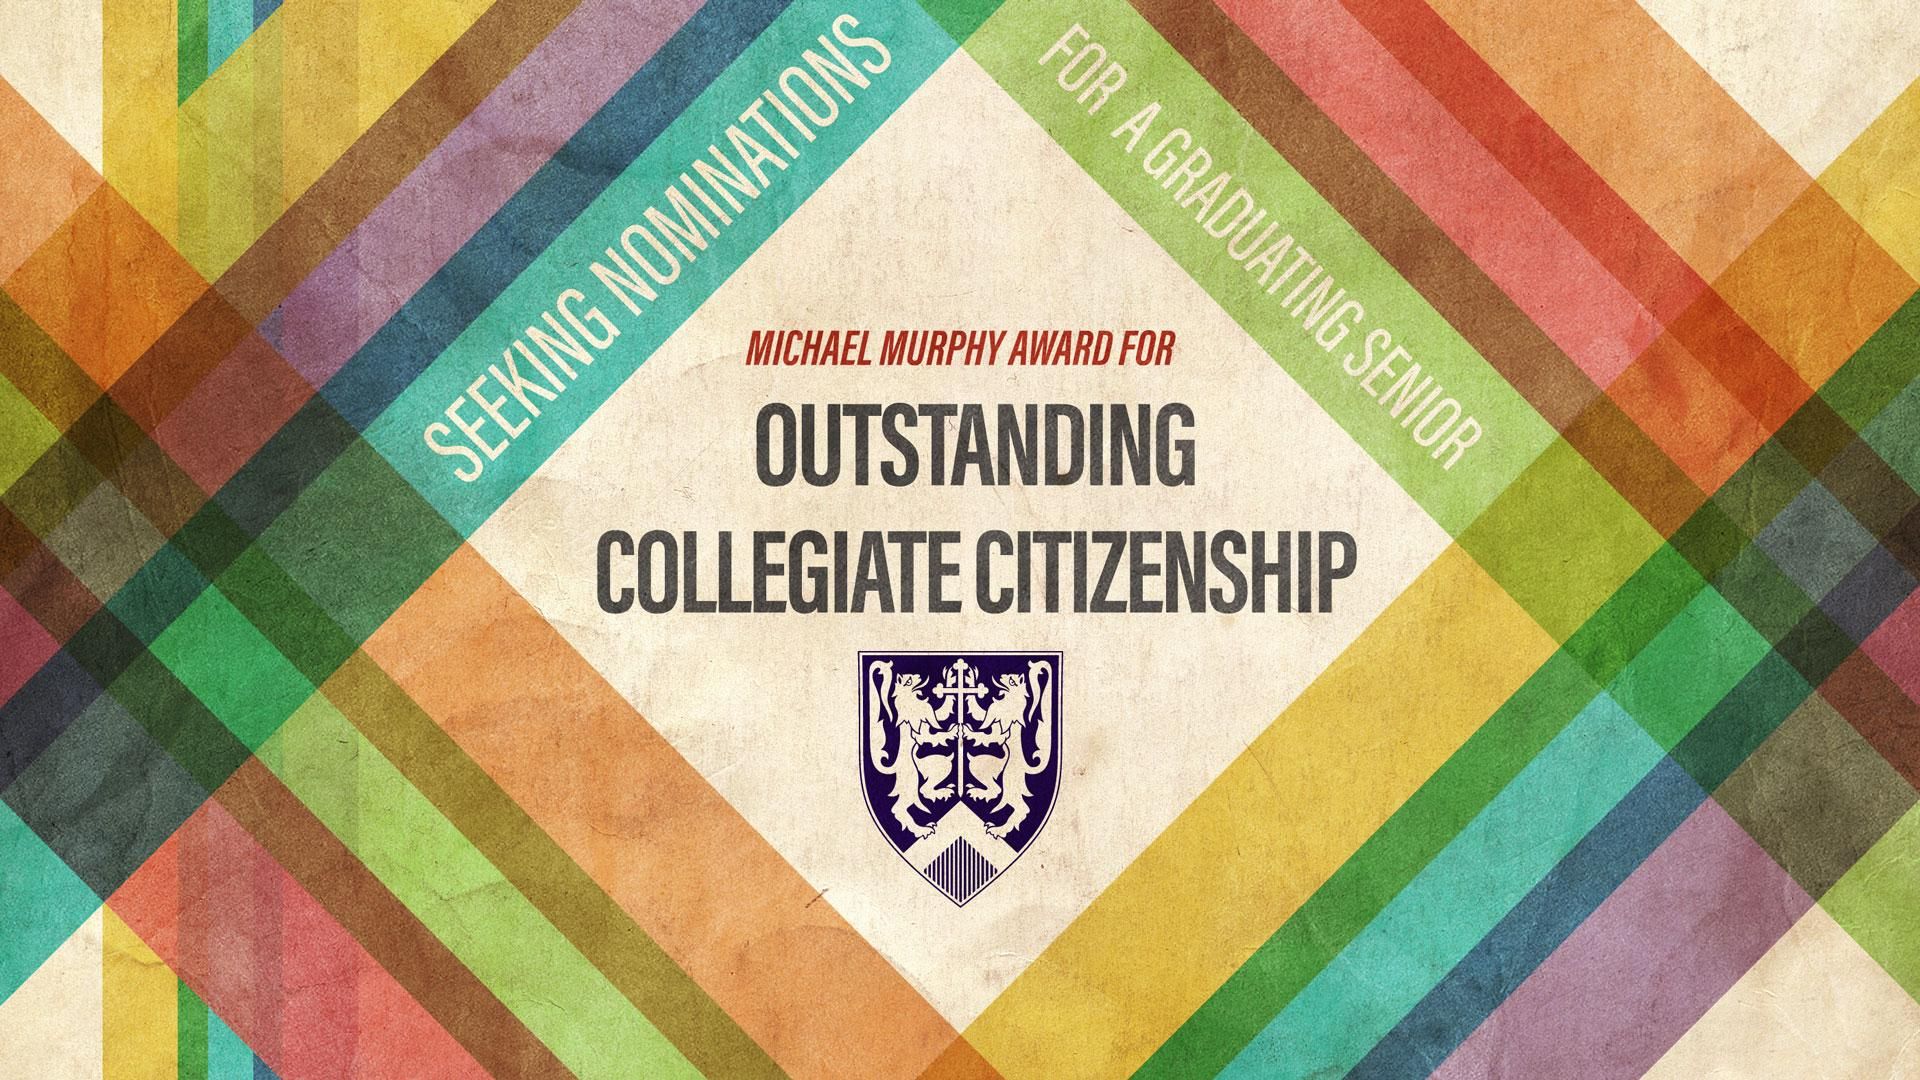 Seeking Nominations for Michael Murphy Award for Outstanding Collegiate Citizenship graphic